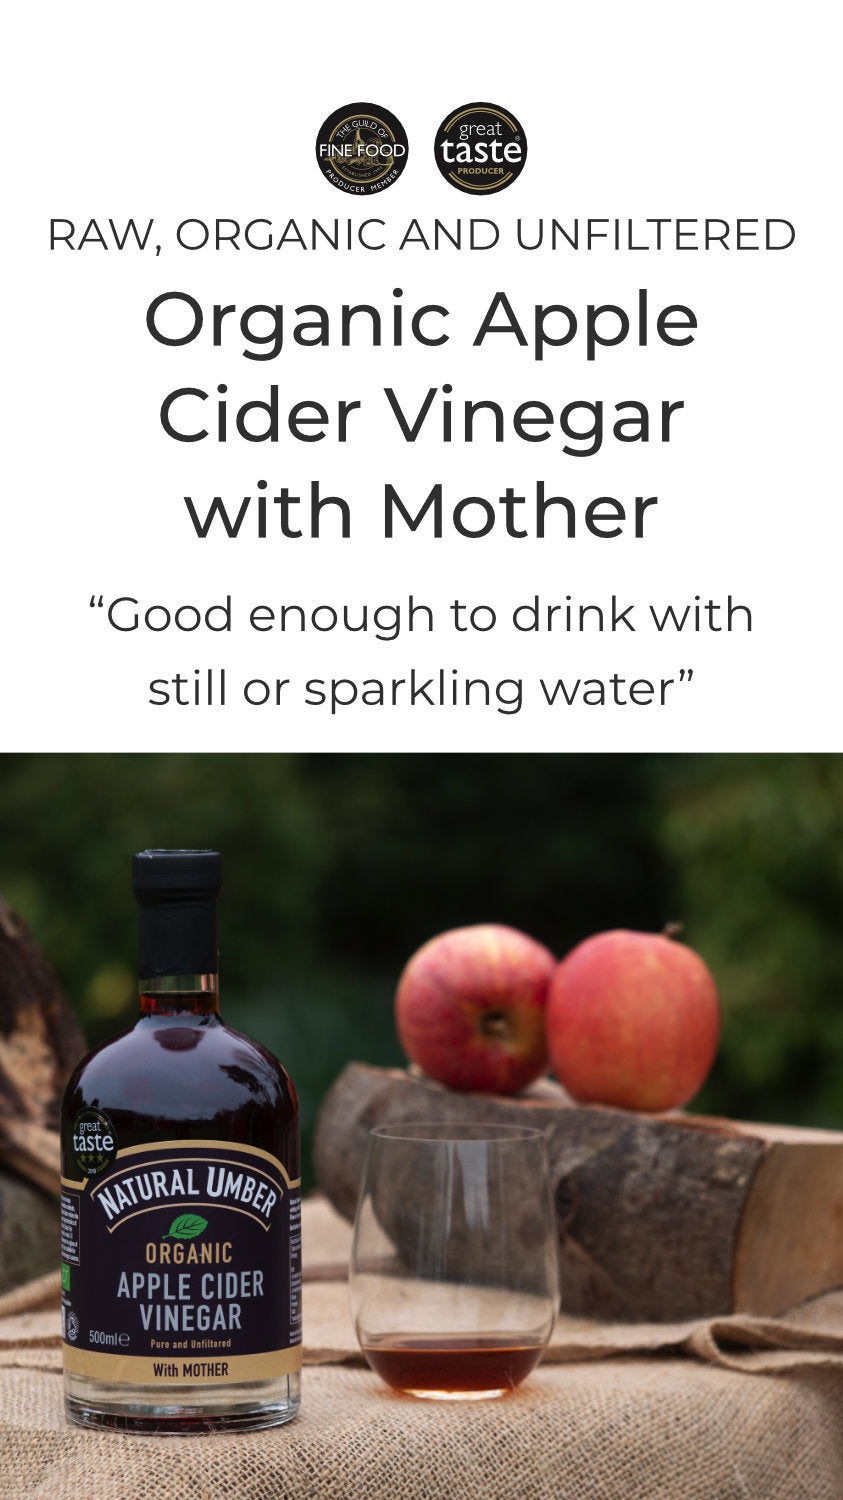 RAW, ORGANIC, UNFILTERED Organic Apple Cider  Vinegar with Mother “Good enough to drink with  still or sparkling water”